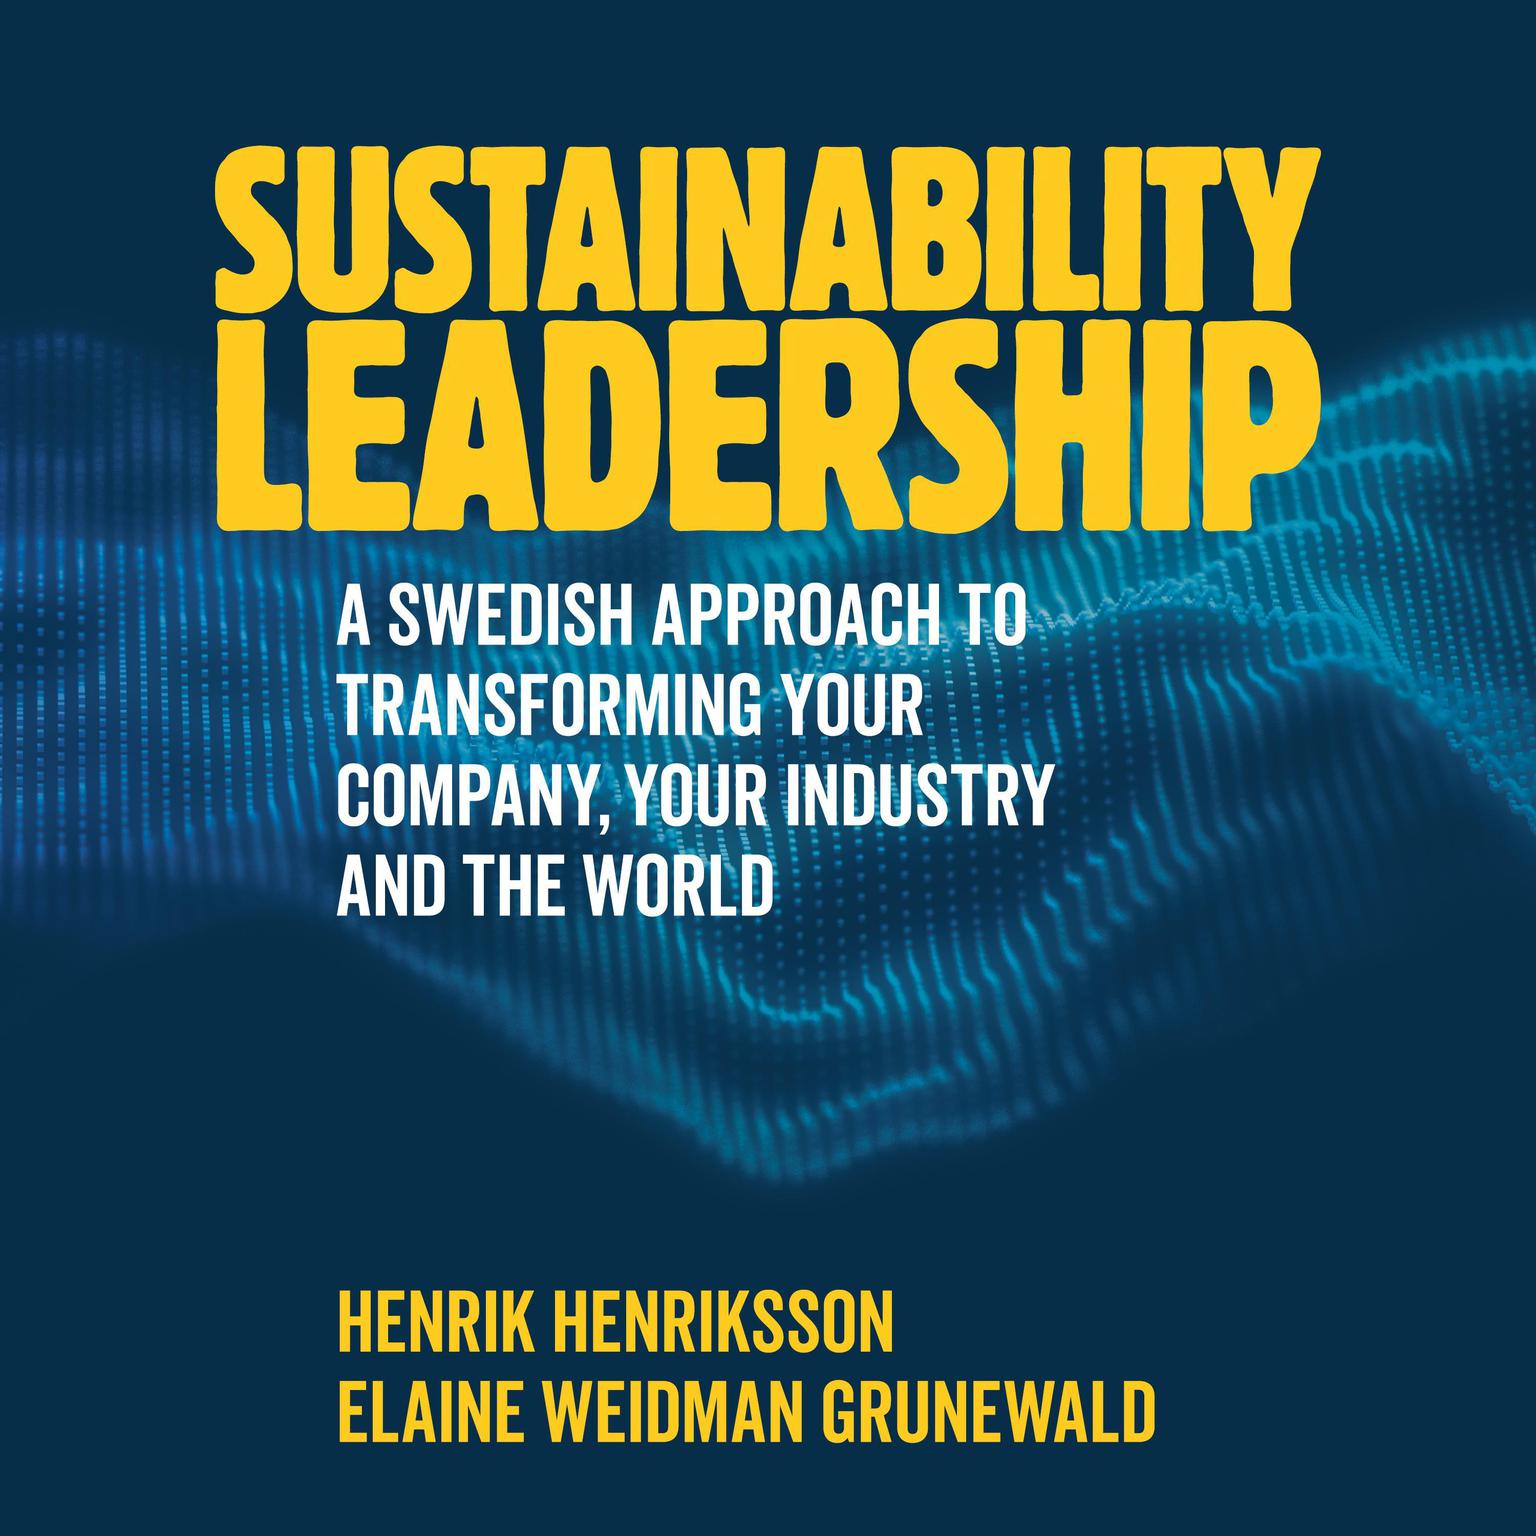 Sustainability Leadership: A Swedish Approach to Transforming your Company, your Industry and the World Audiobook, by Henrik Henriksson